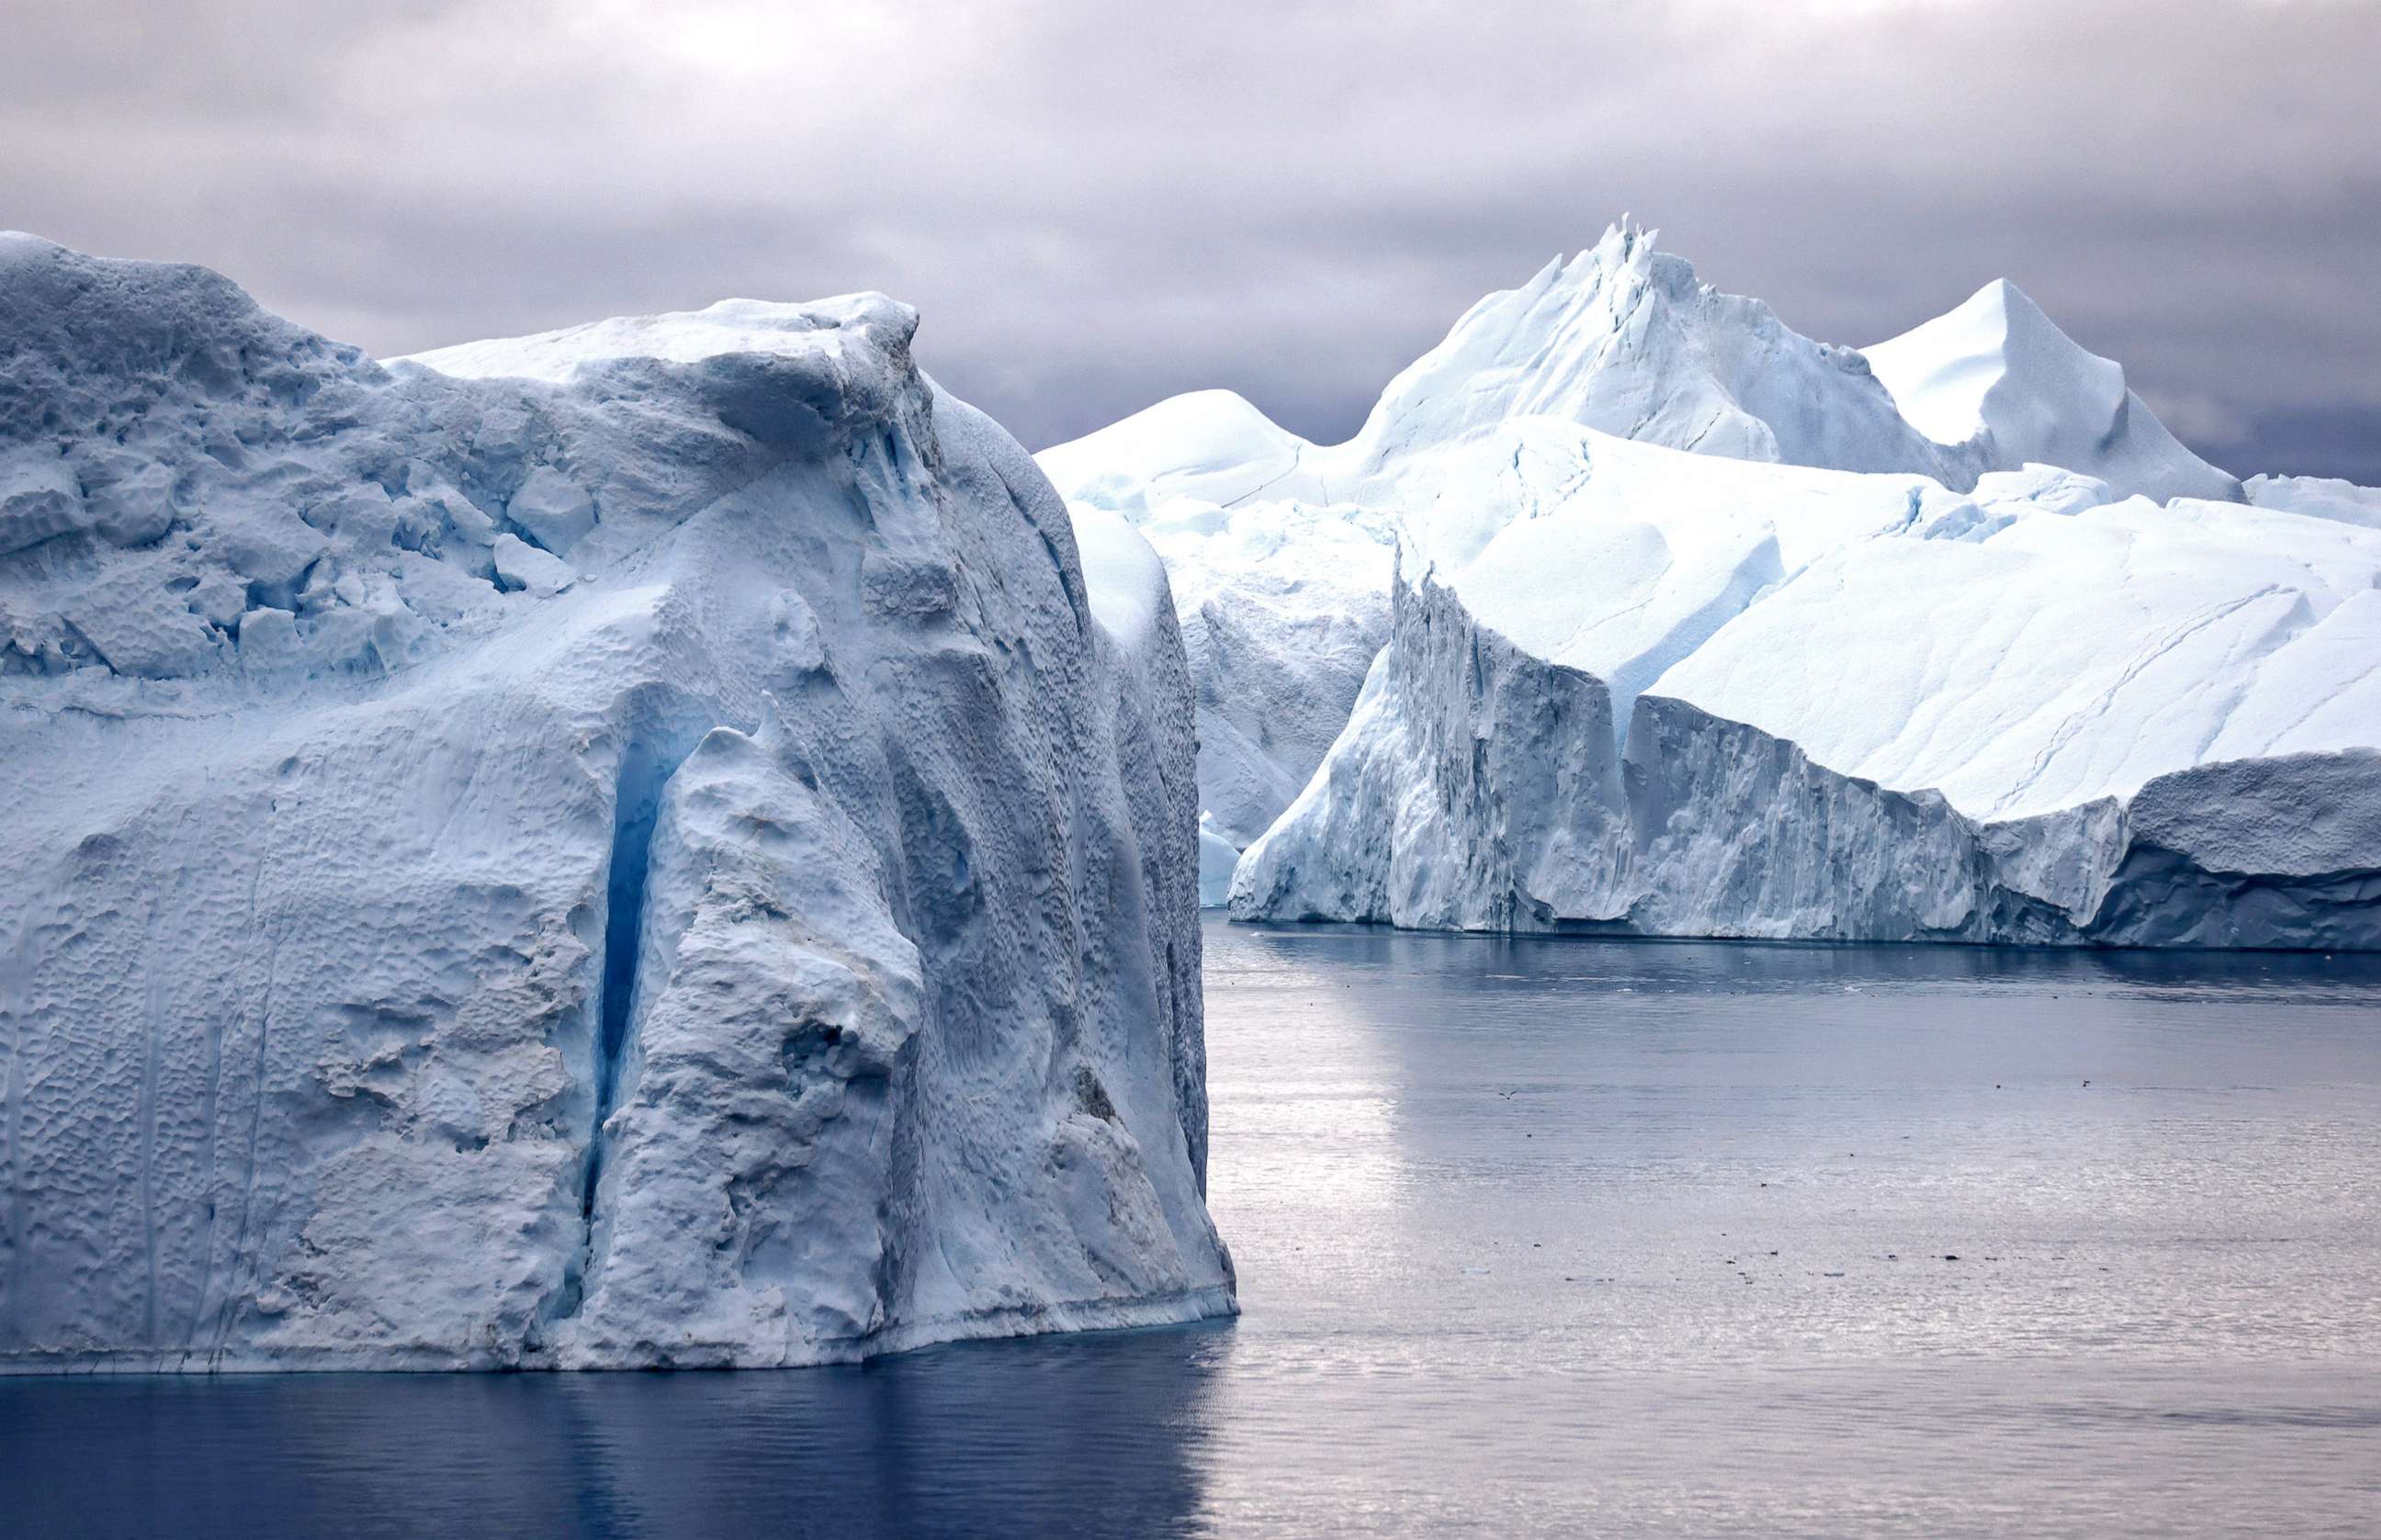 Climate explained: why is the Arctic warming faster than other